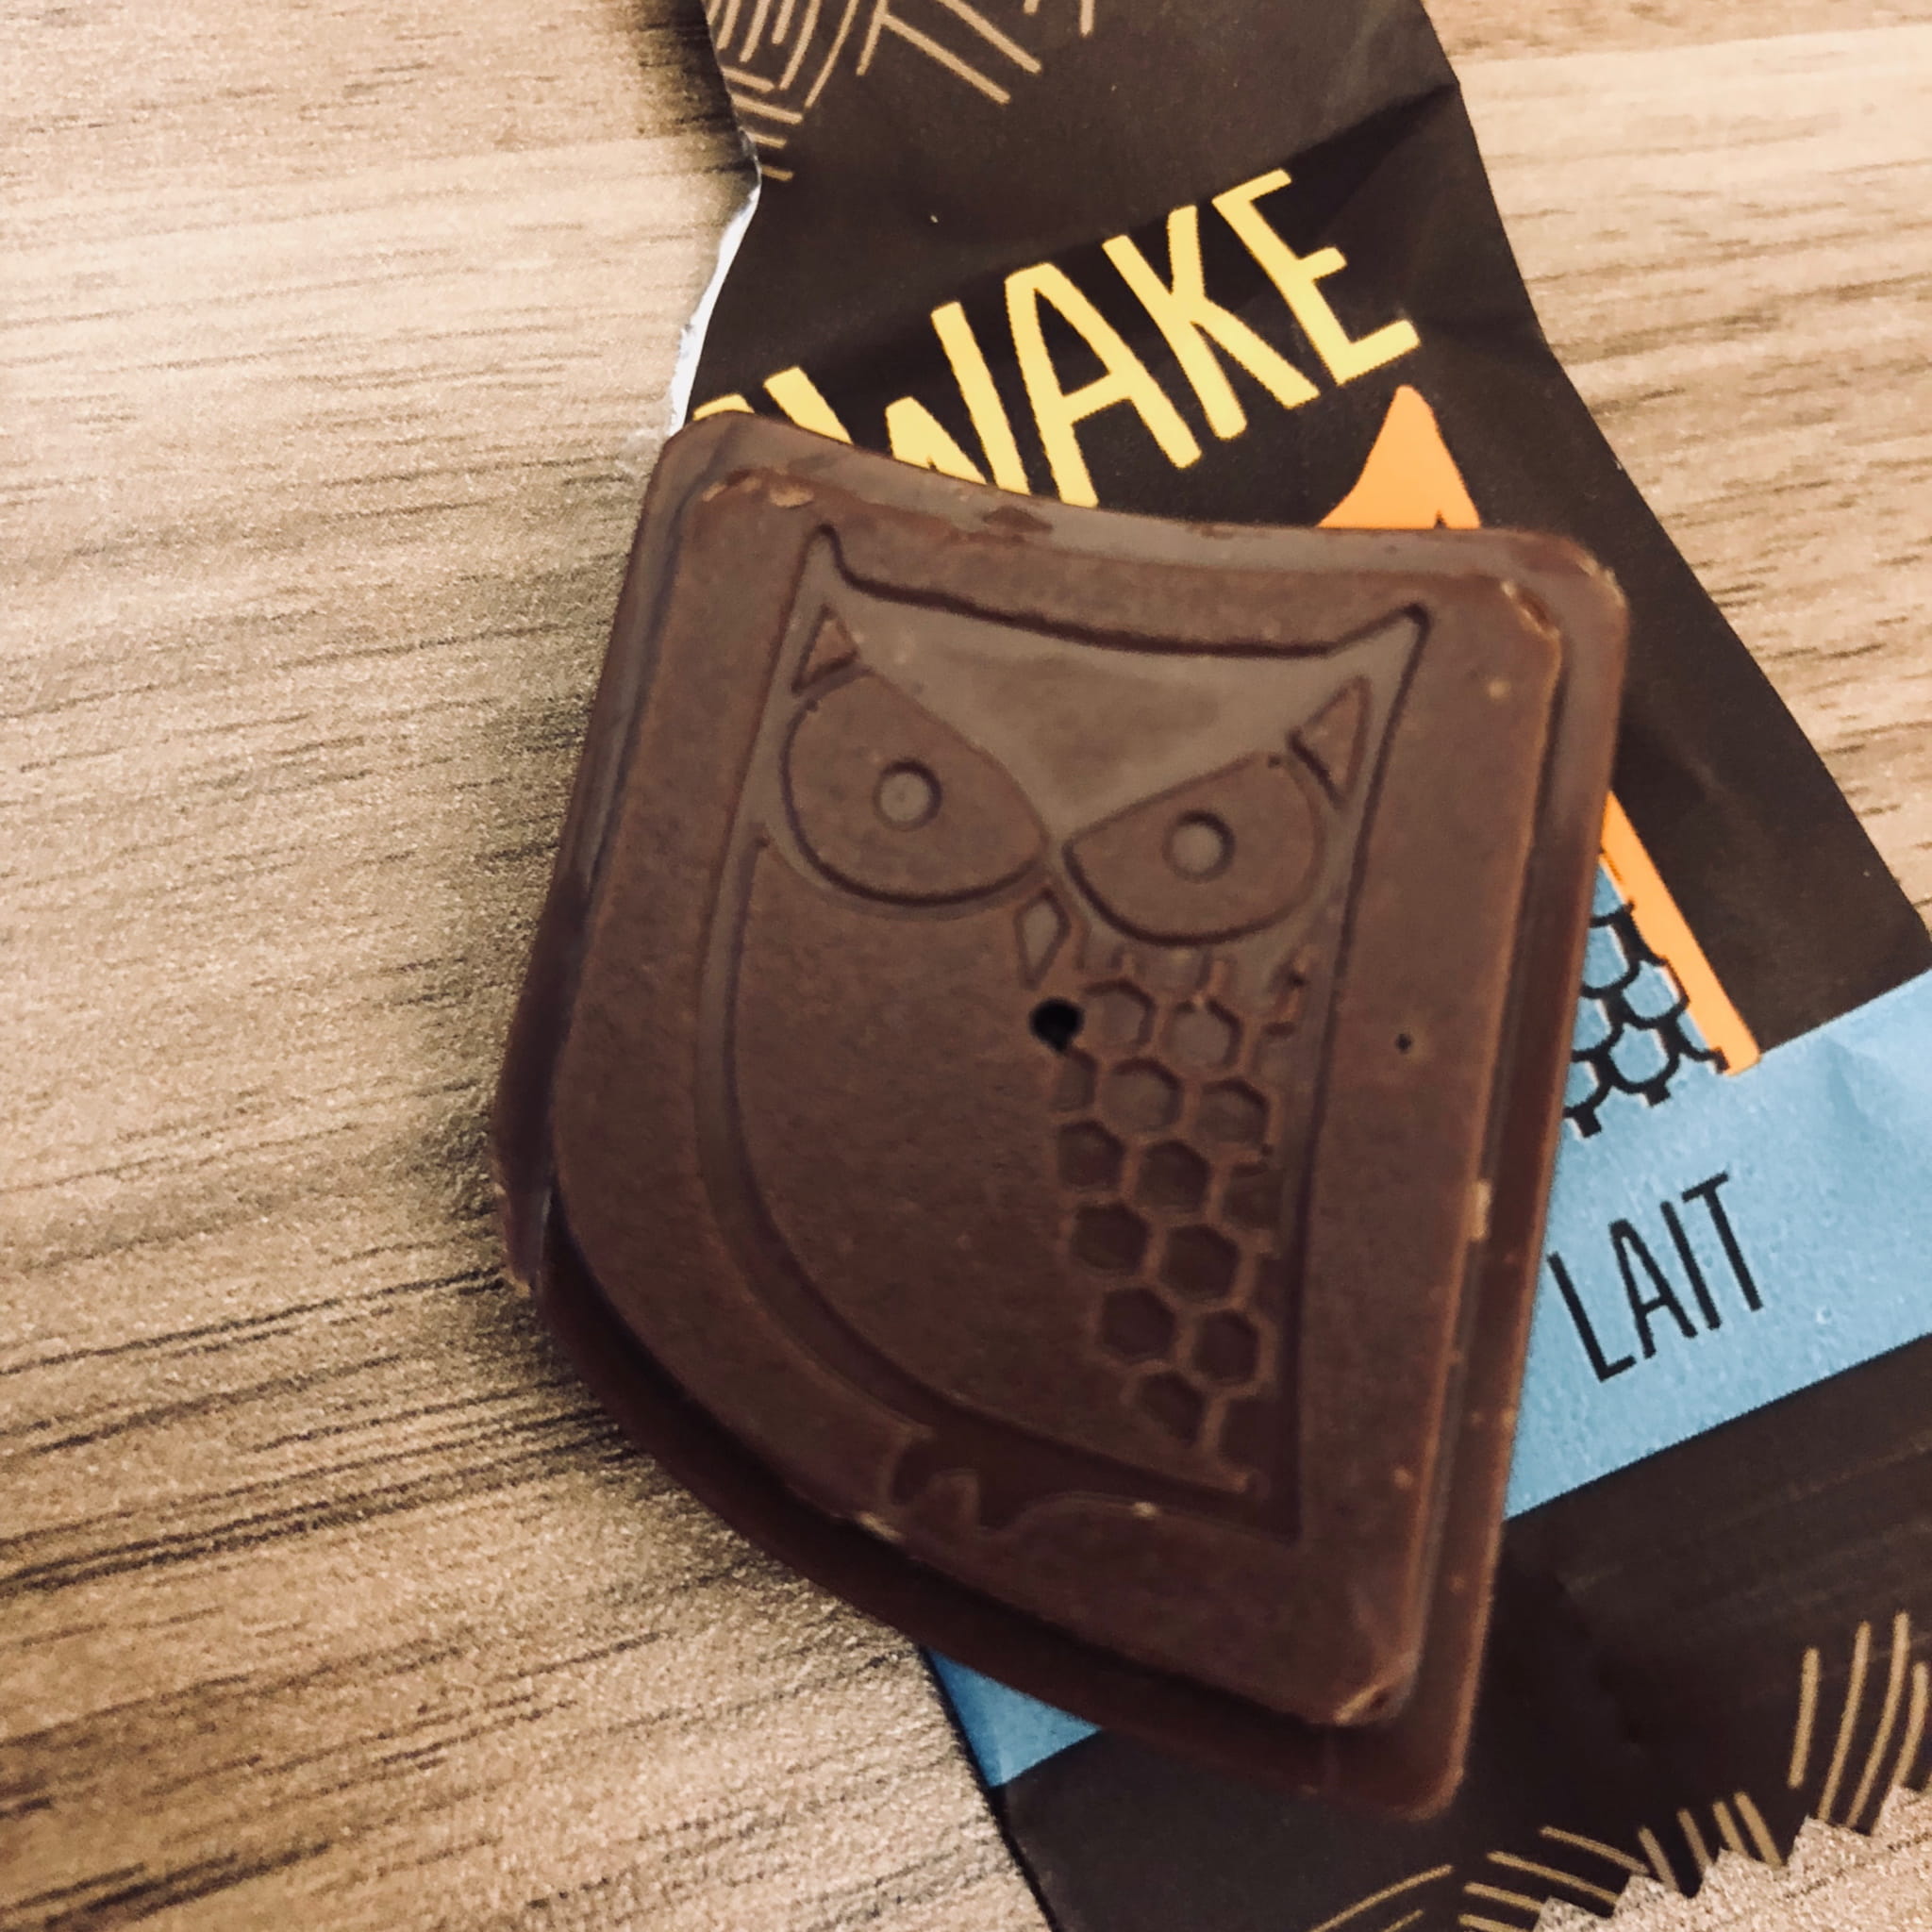 Chocolate owl reference